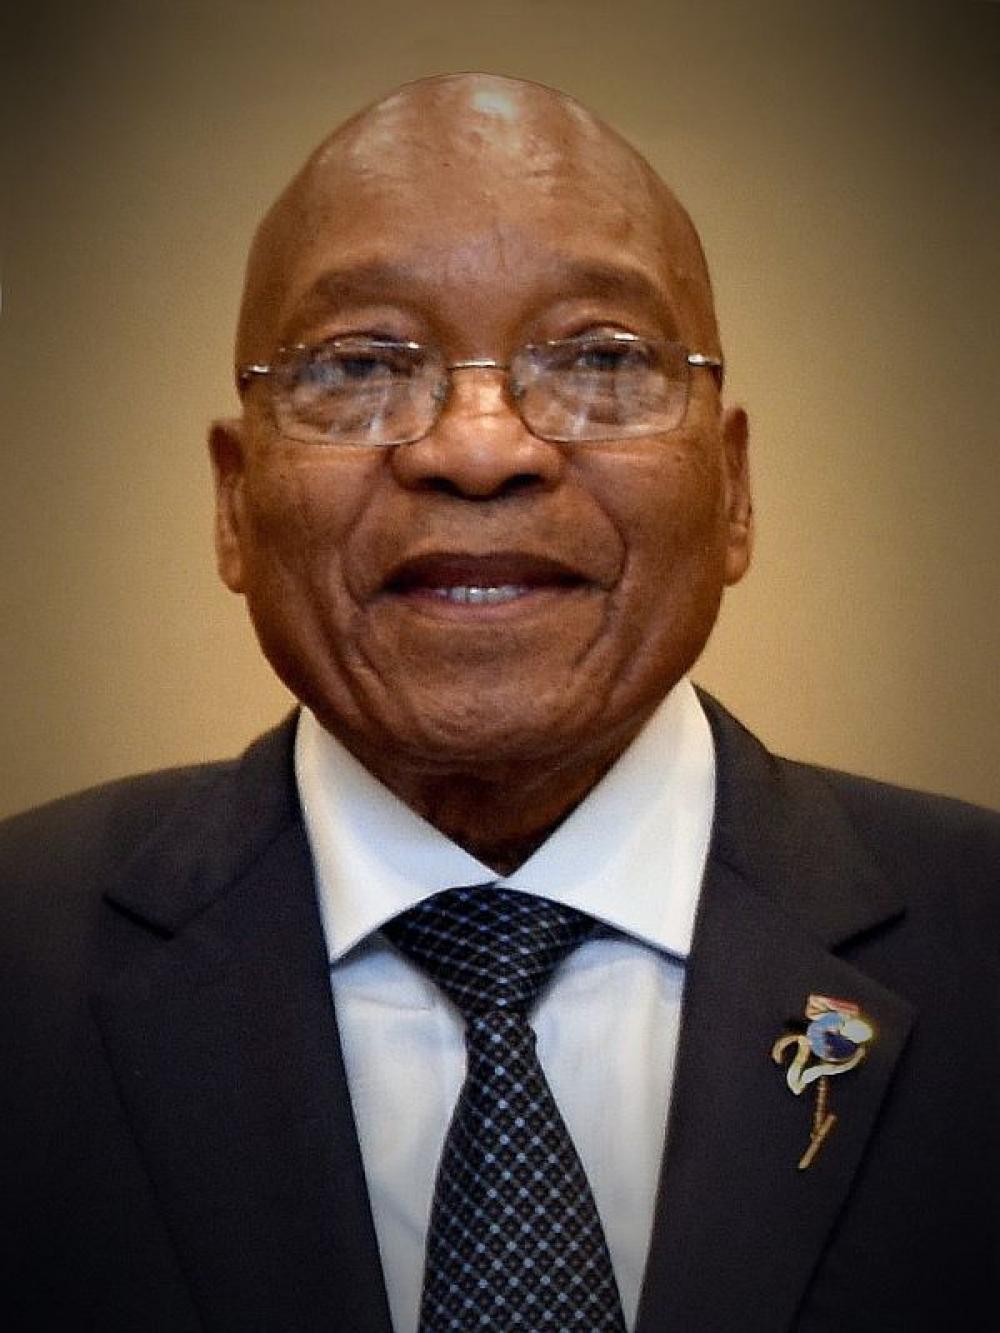 Former South Africa Prez Zuma handed 15 months imprisonment for ignoring inquiry summons